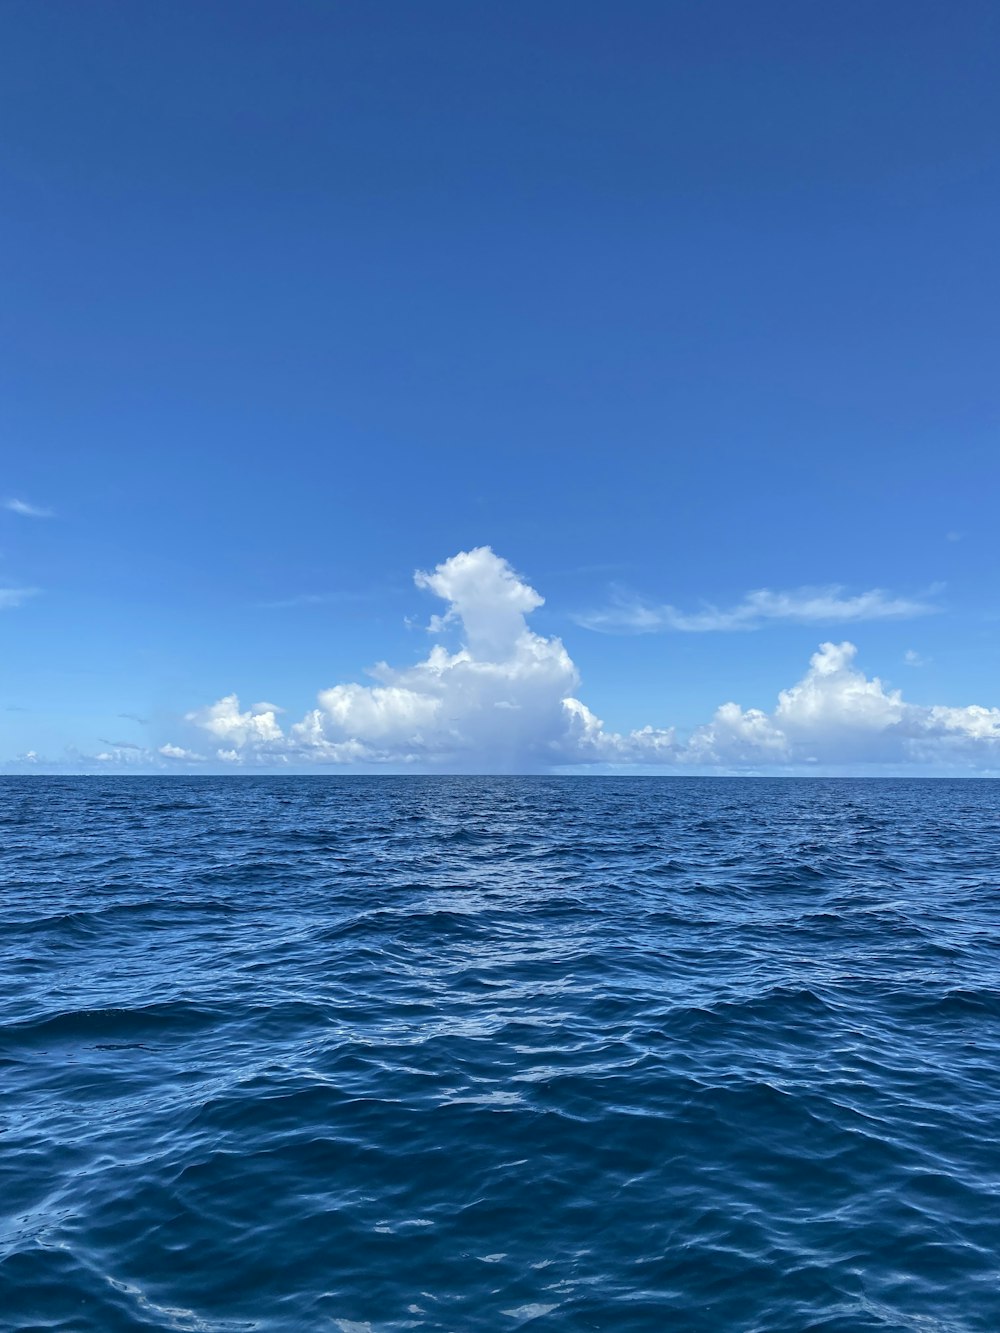 a body of water with a large cloud in the distance